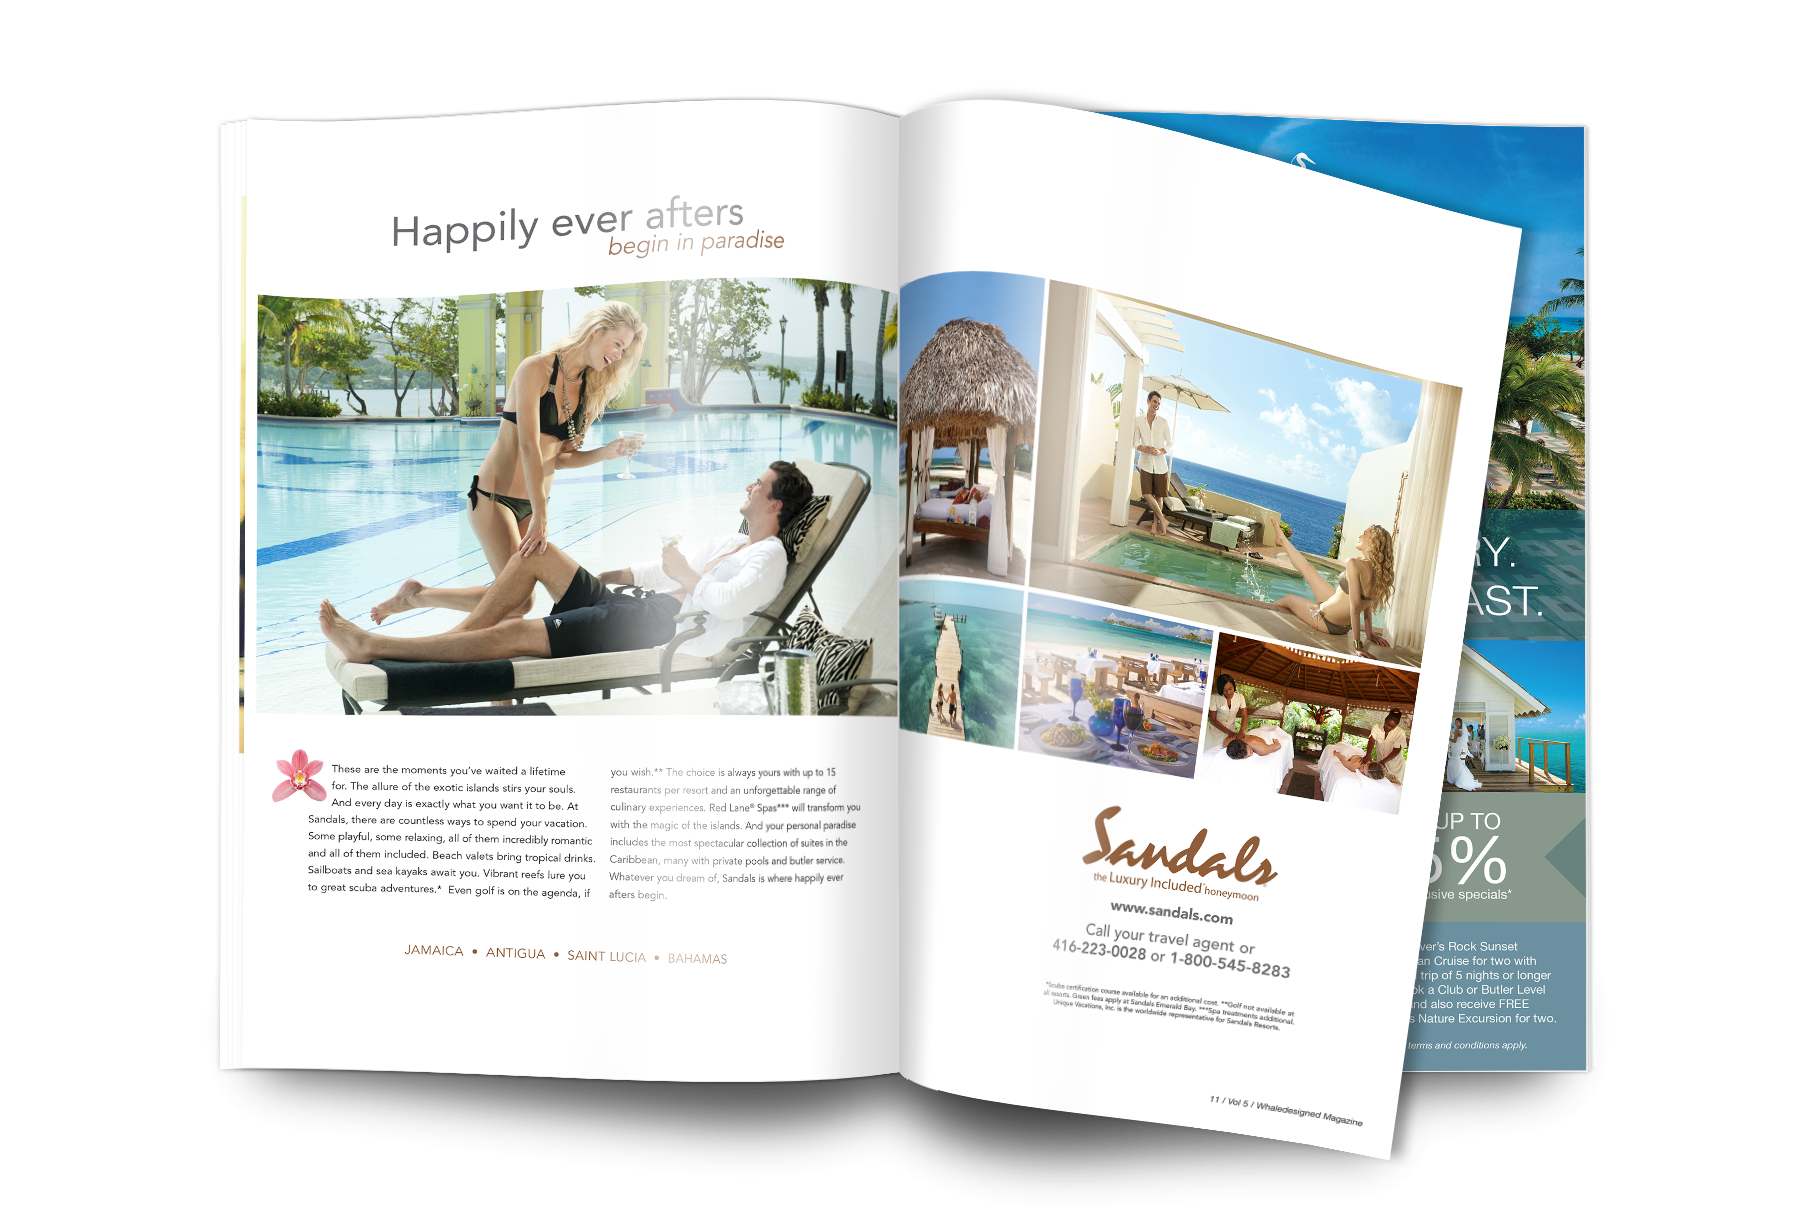 Luxury All-Inclusive Caribbean Holidays | Sandals Resorts